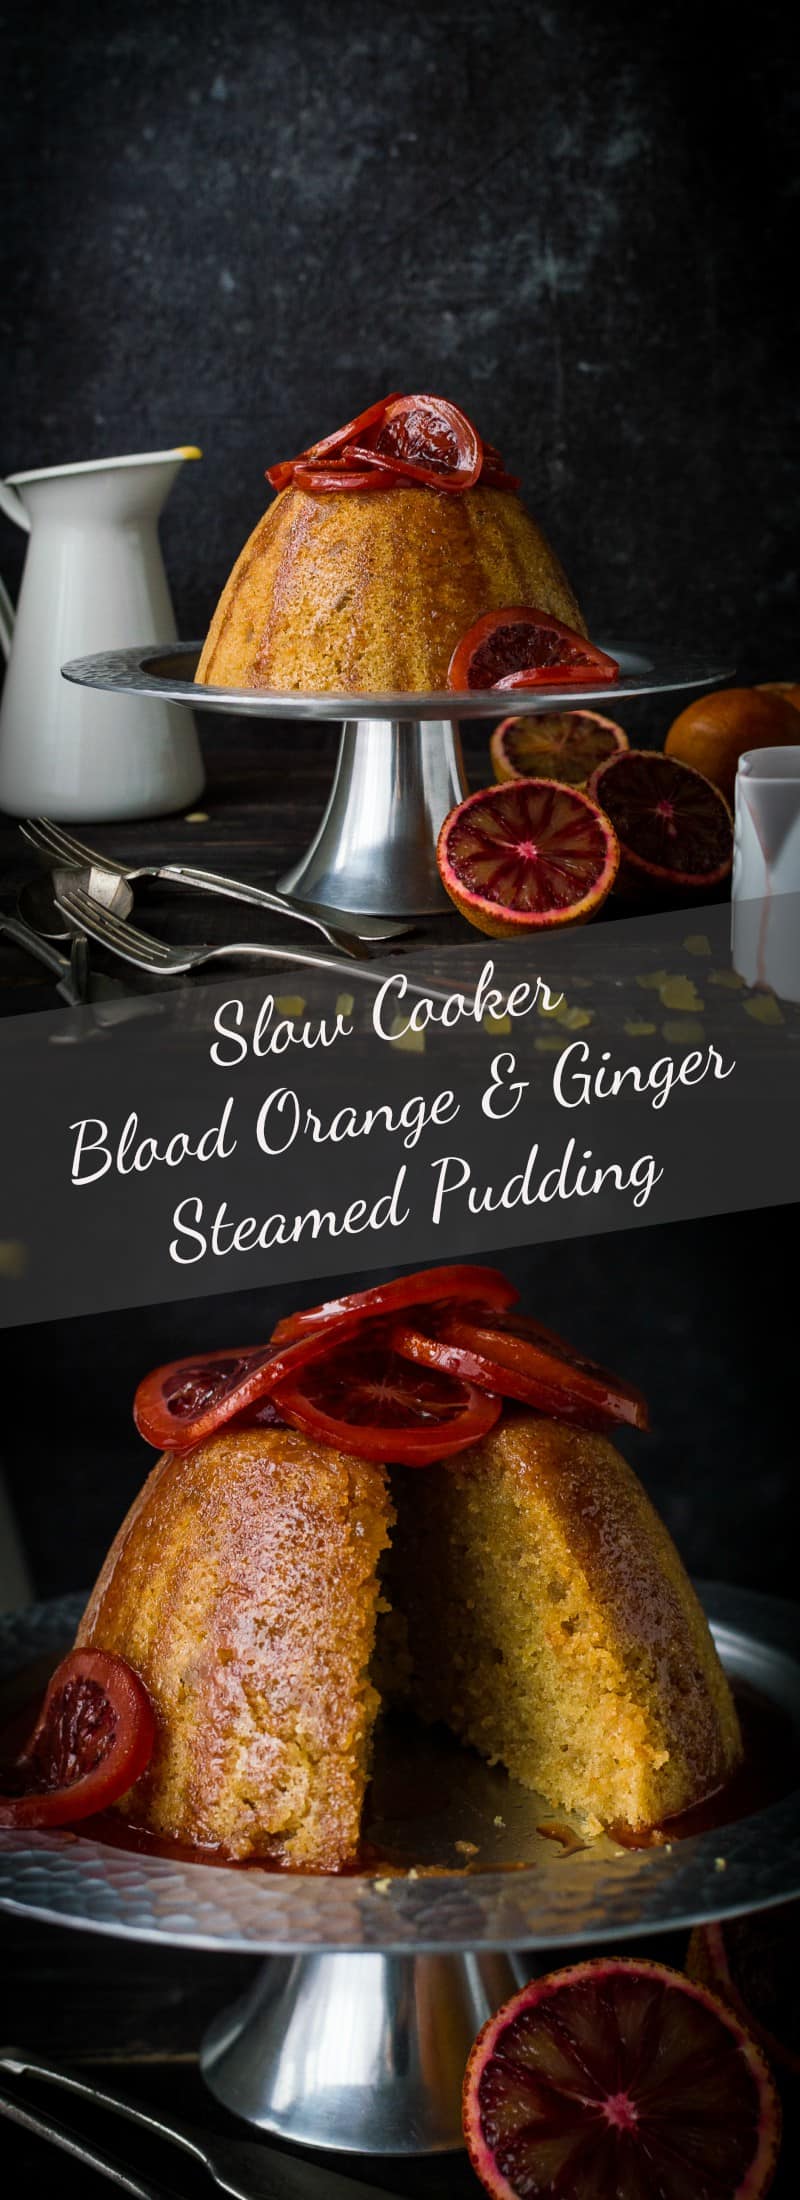 Slow cooker blood orange and ginger steamed pudding - this delicious steamed pudding cooks right in your slow cooker! A perfect dessert for the colder months. #dessert #crockpot #pudding